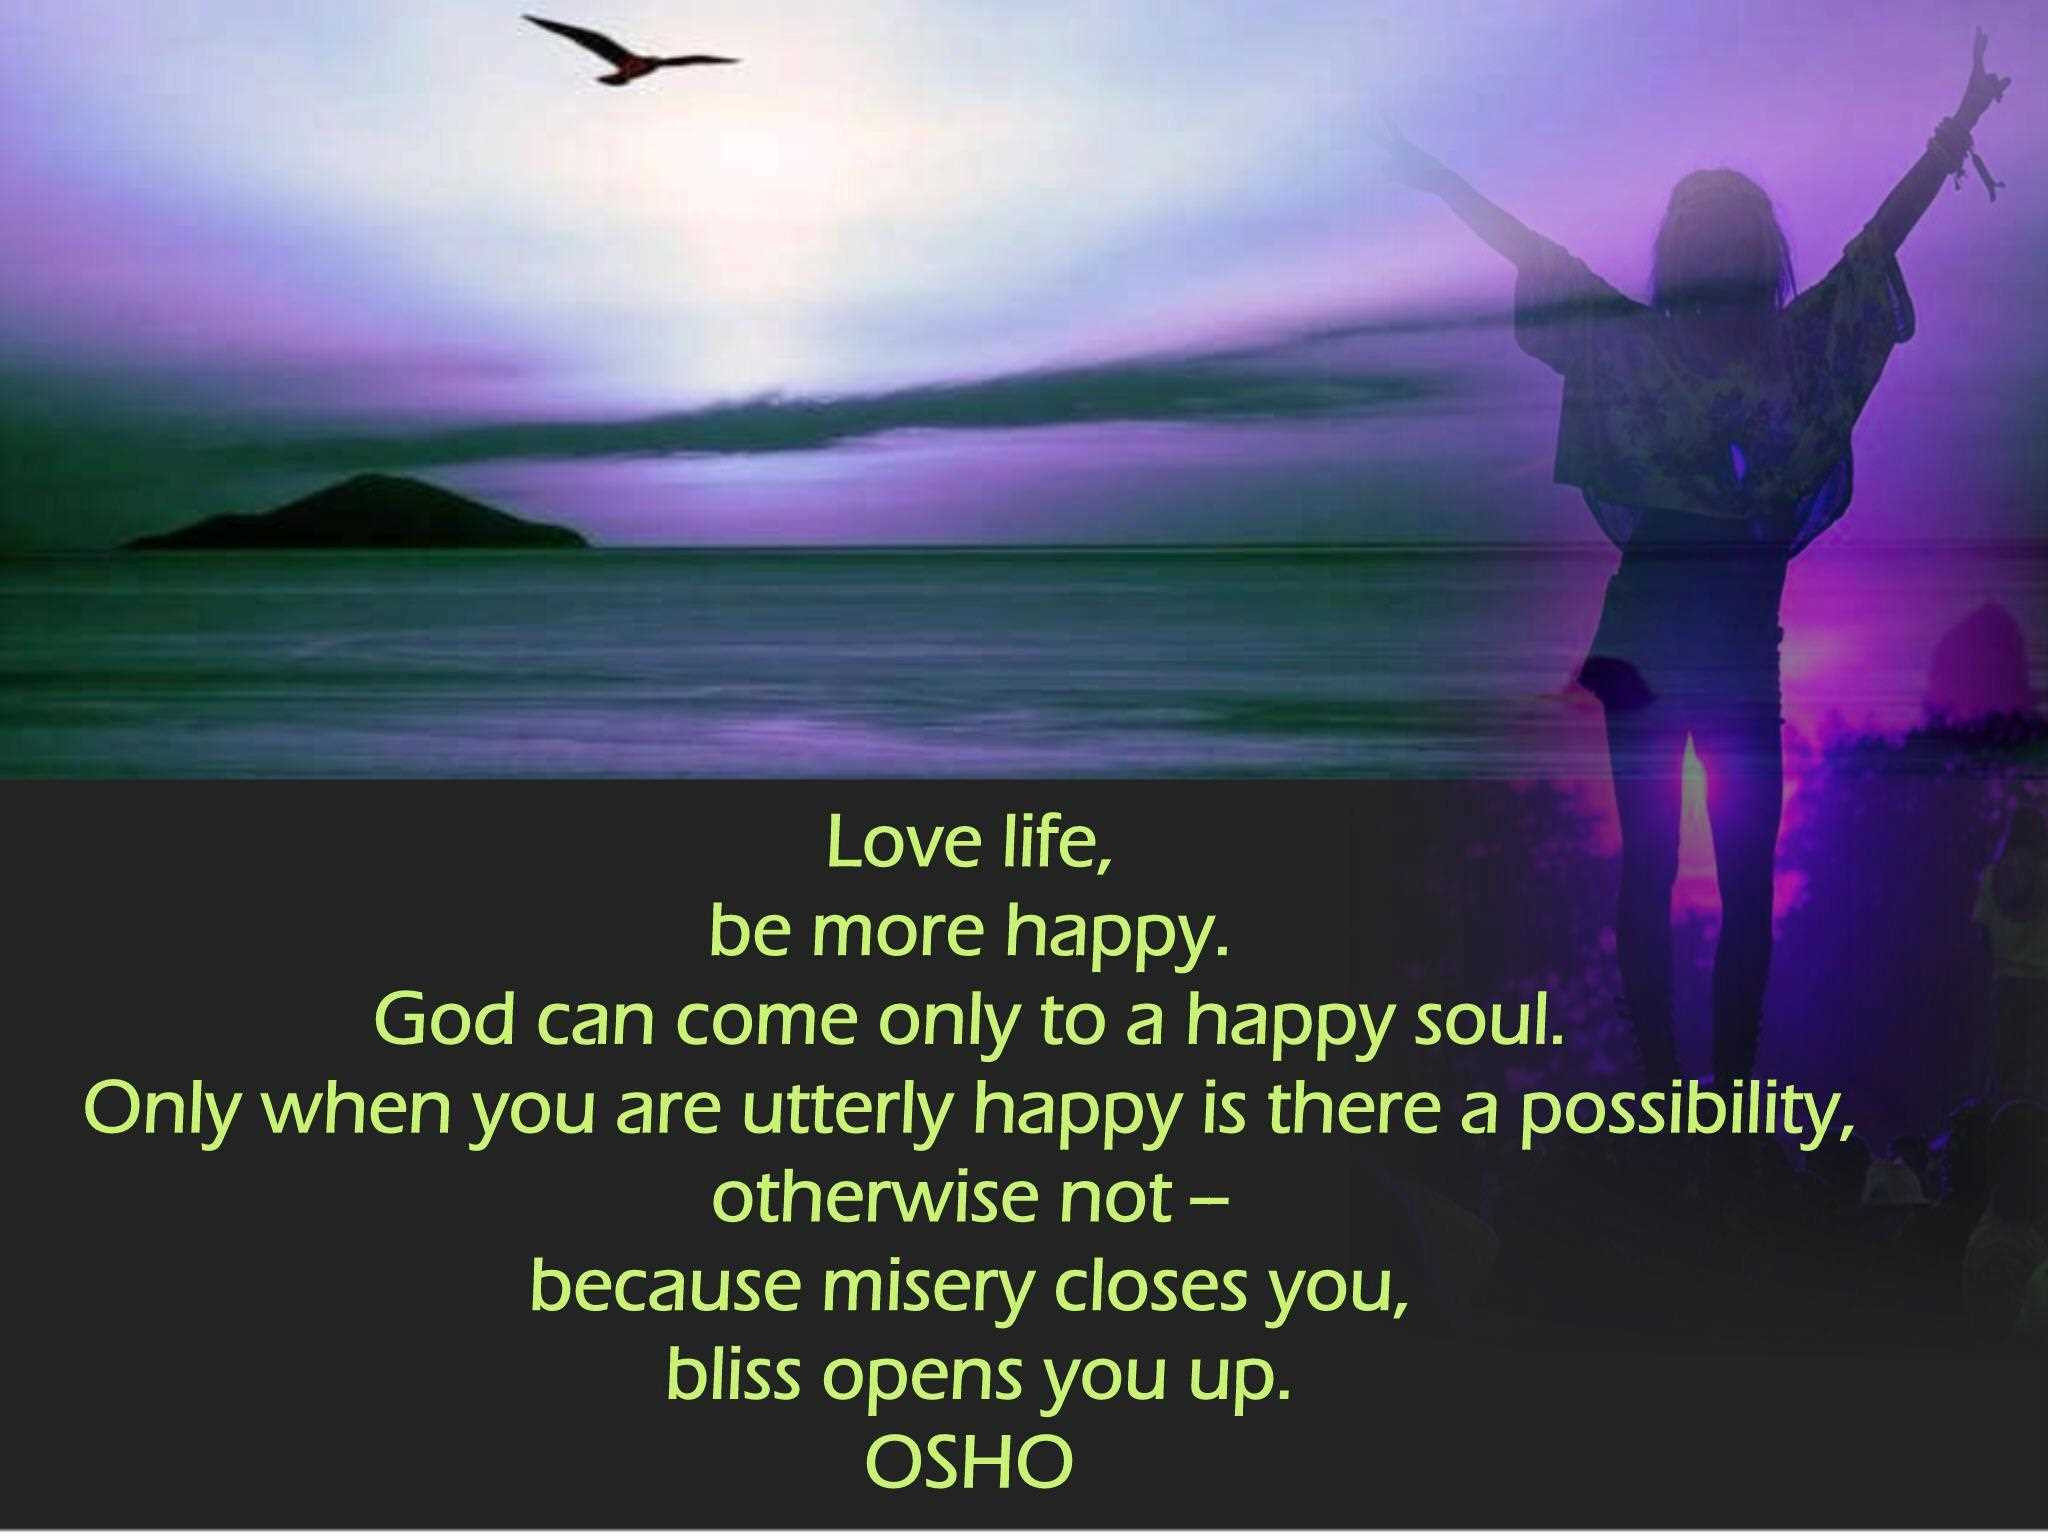 Positive Quotes About Life And Love
 Osho Quotes About Love QuotesGram